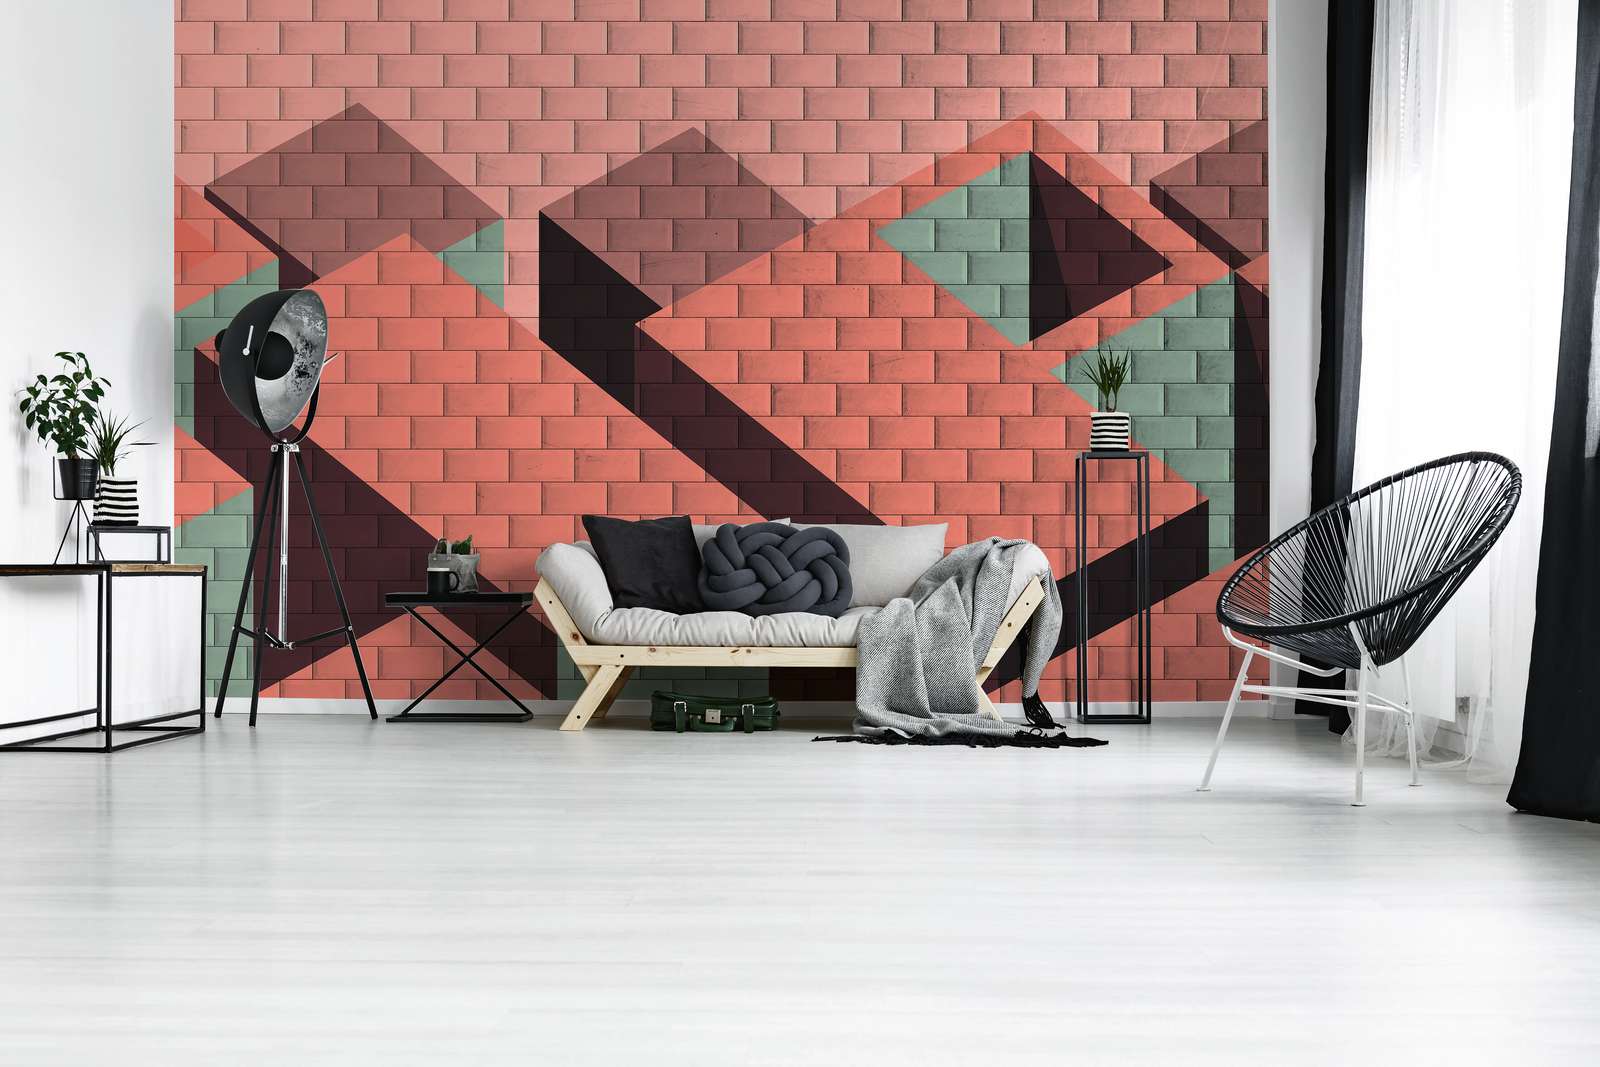             Brick Wall Wall Mural with Block Painting - Red, Pink, Green
        